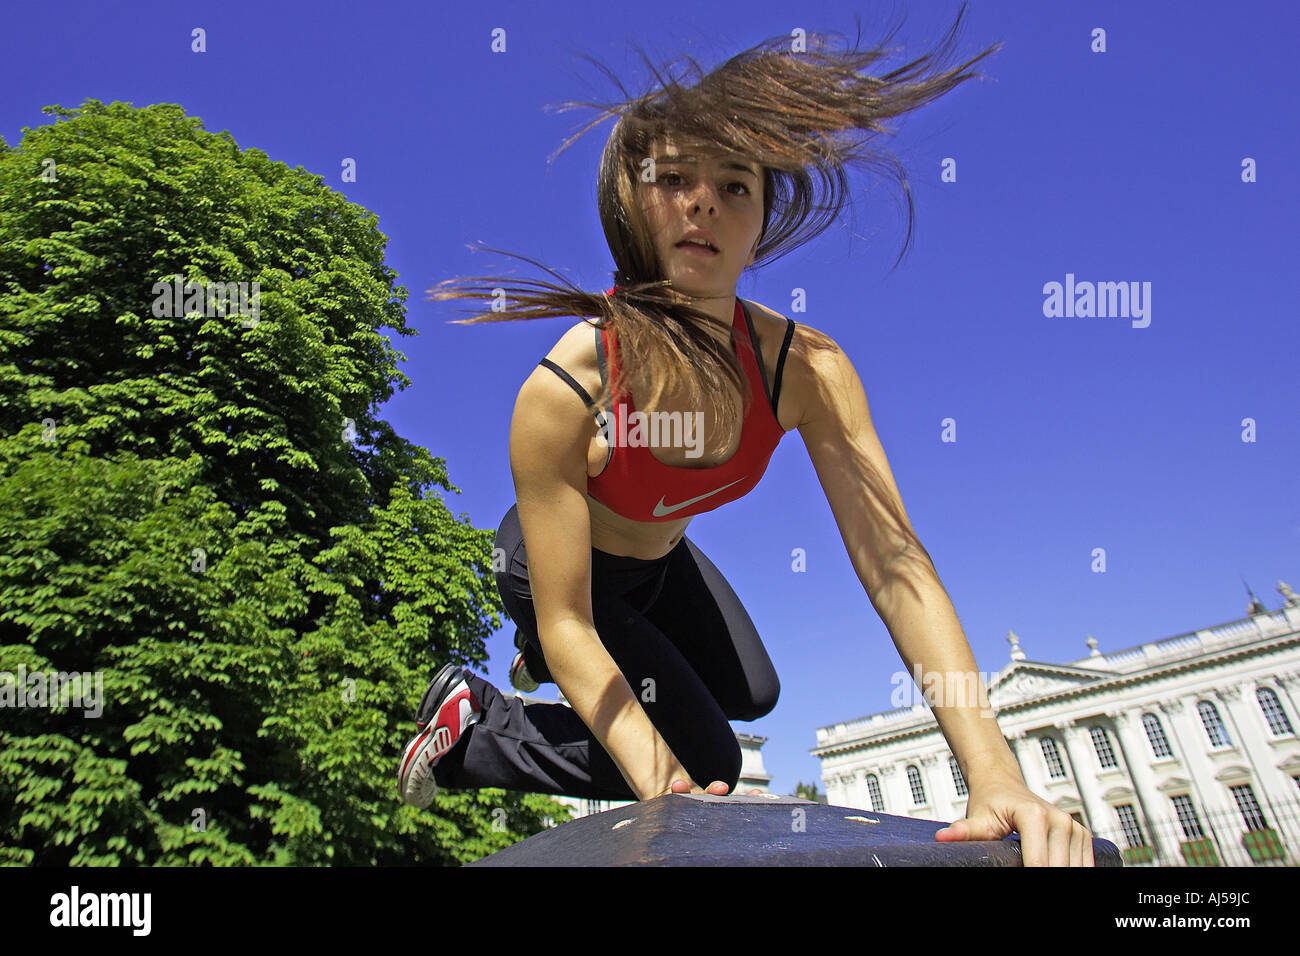 le parkour or free running Stock Photo